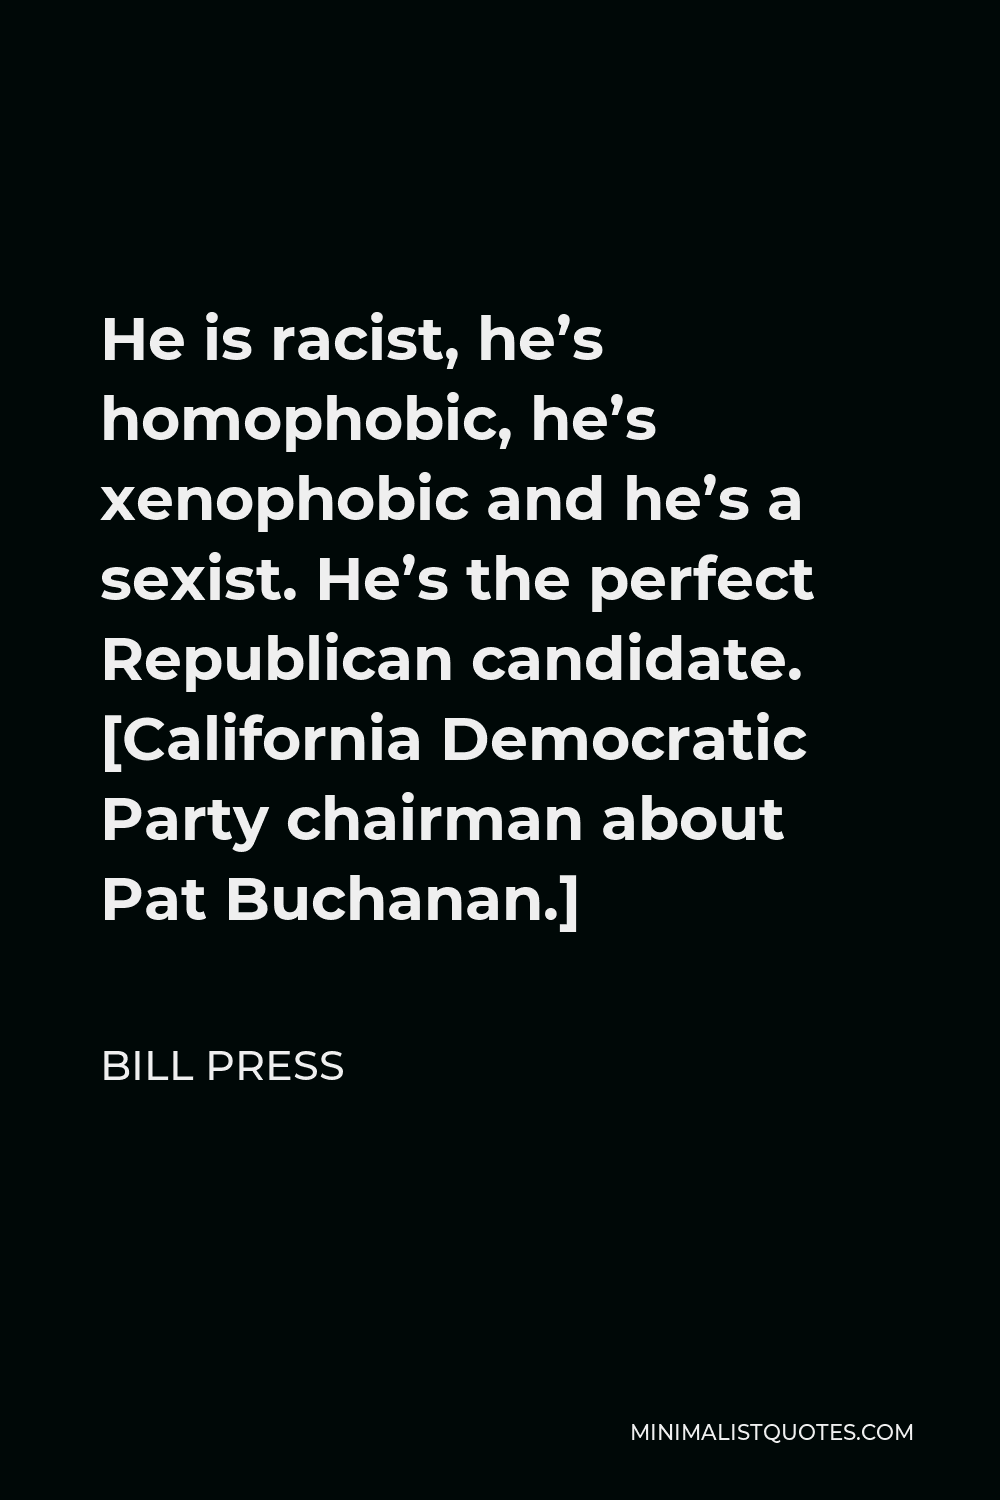 Bill Press Quote - He is racist, he’s homophobic, he’s xenophobic and he’s a sexist. He’s the perfect Republican candidate. [California Democratic Party chairman about Pat Buchanan.]